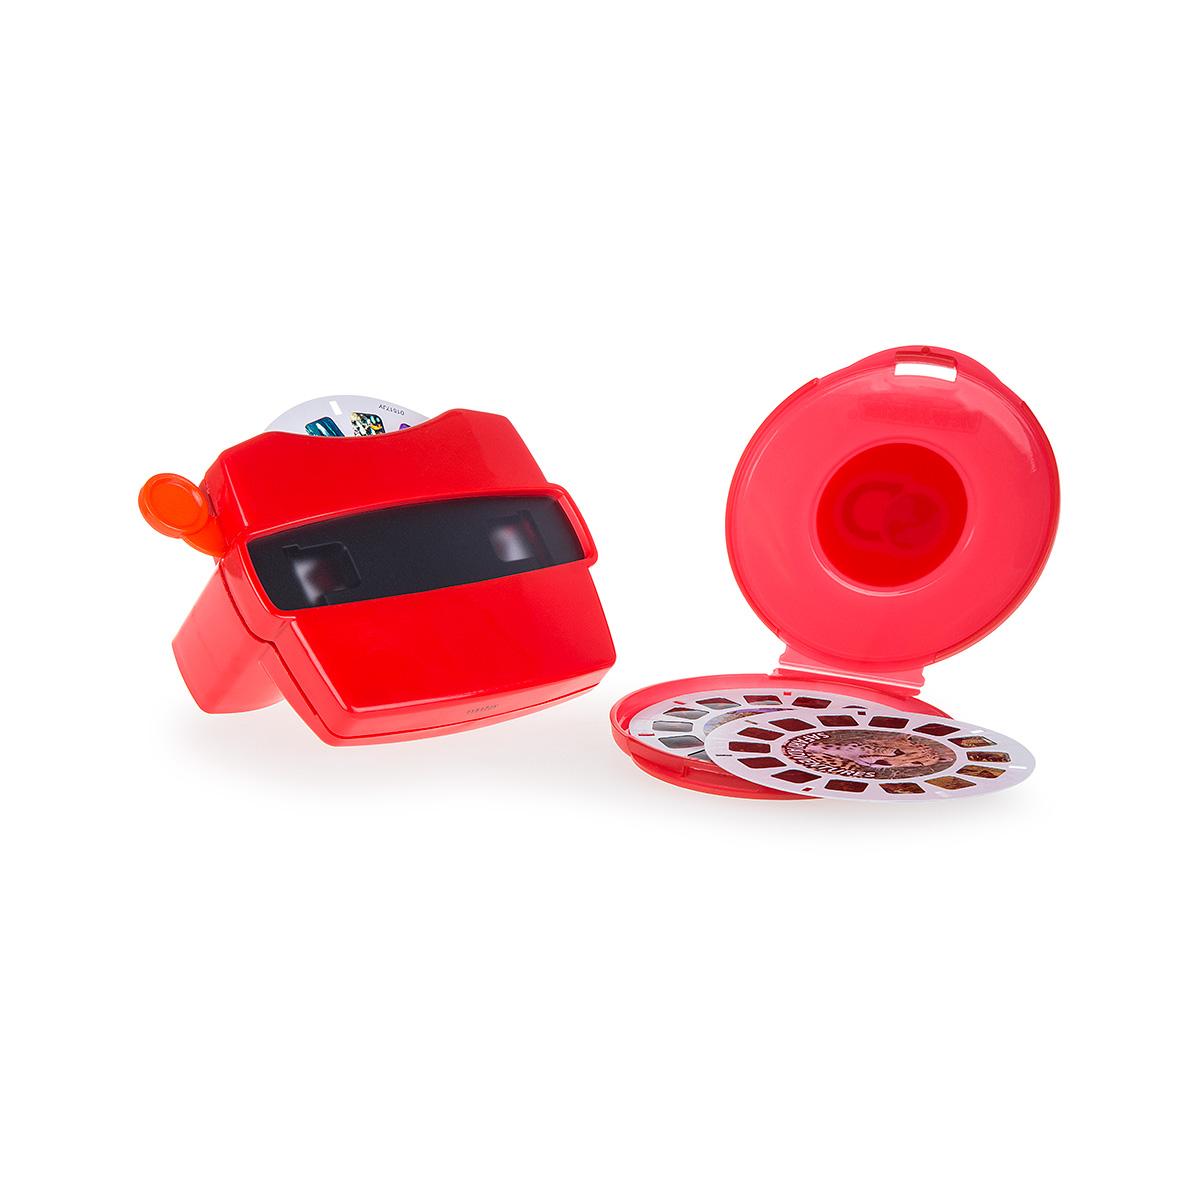 Schylling View-Master & Discovery Kids Reels With Bonus Marine